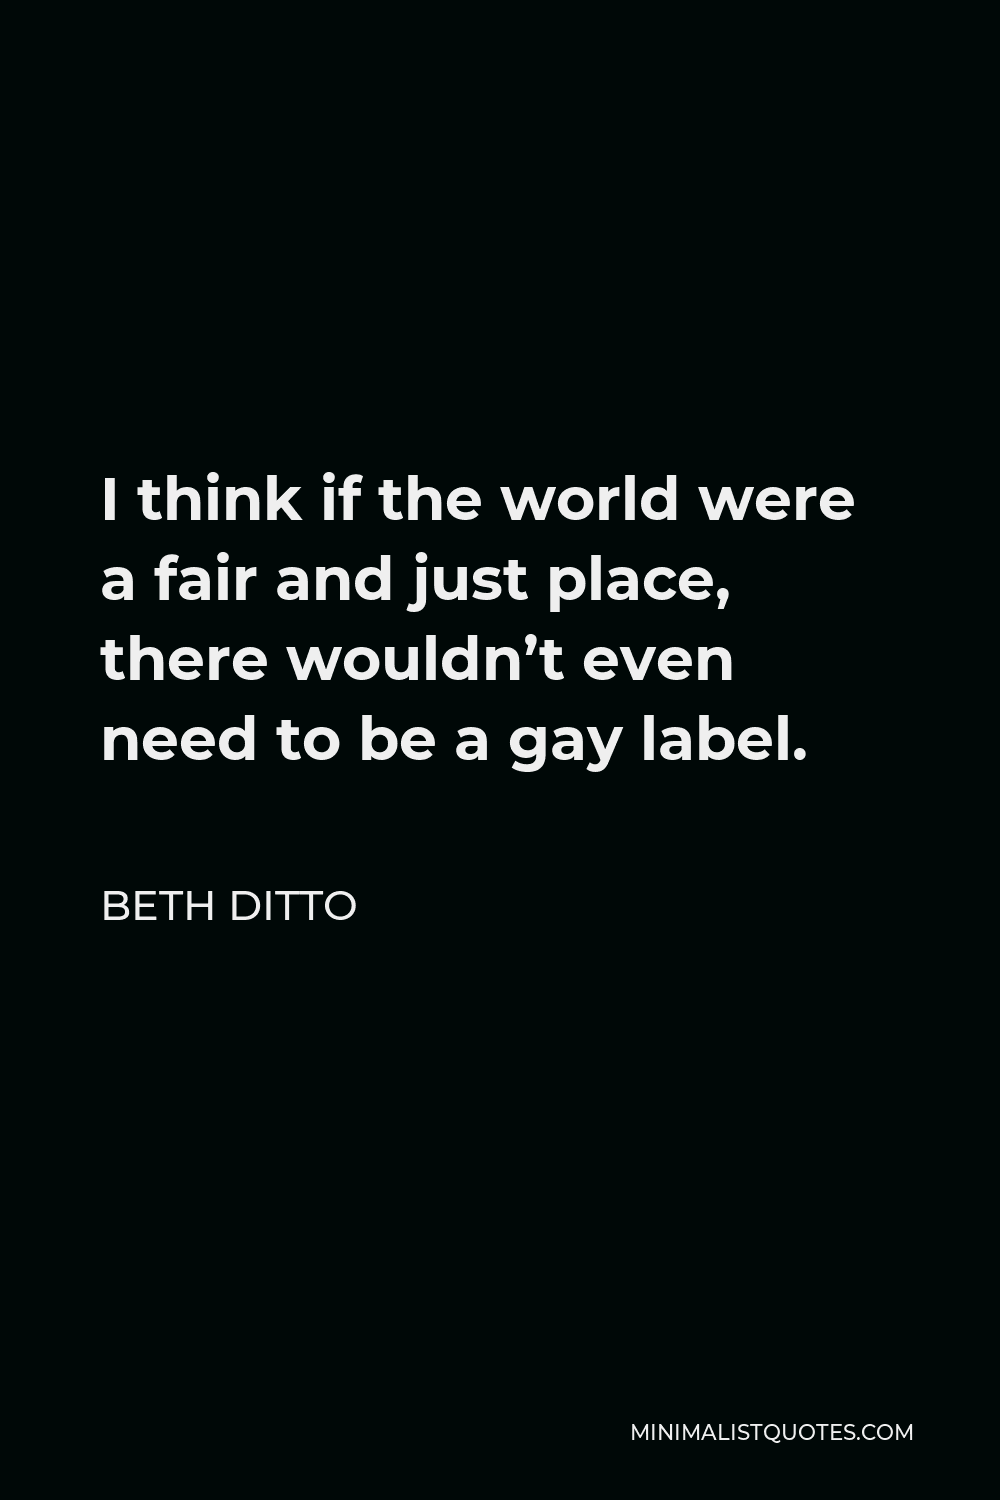 Beth Ditto Quote - I think if the world were a fair and just place, there wouldn’t even need to be a gay label.